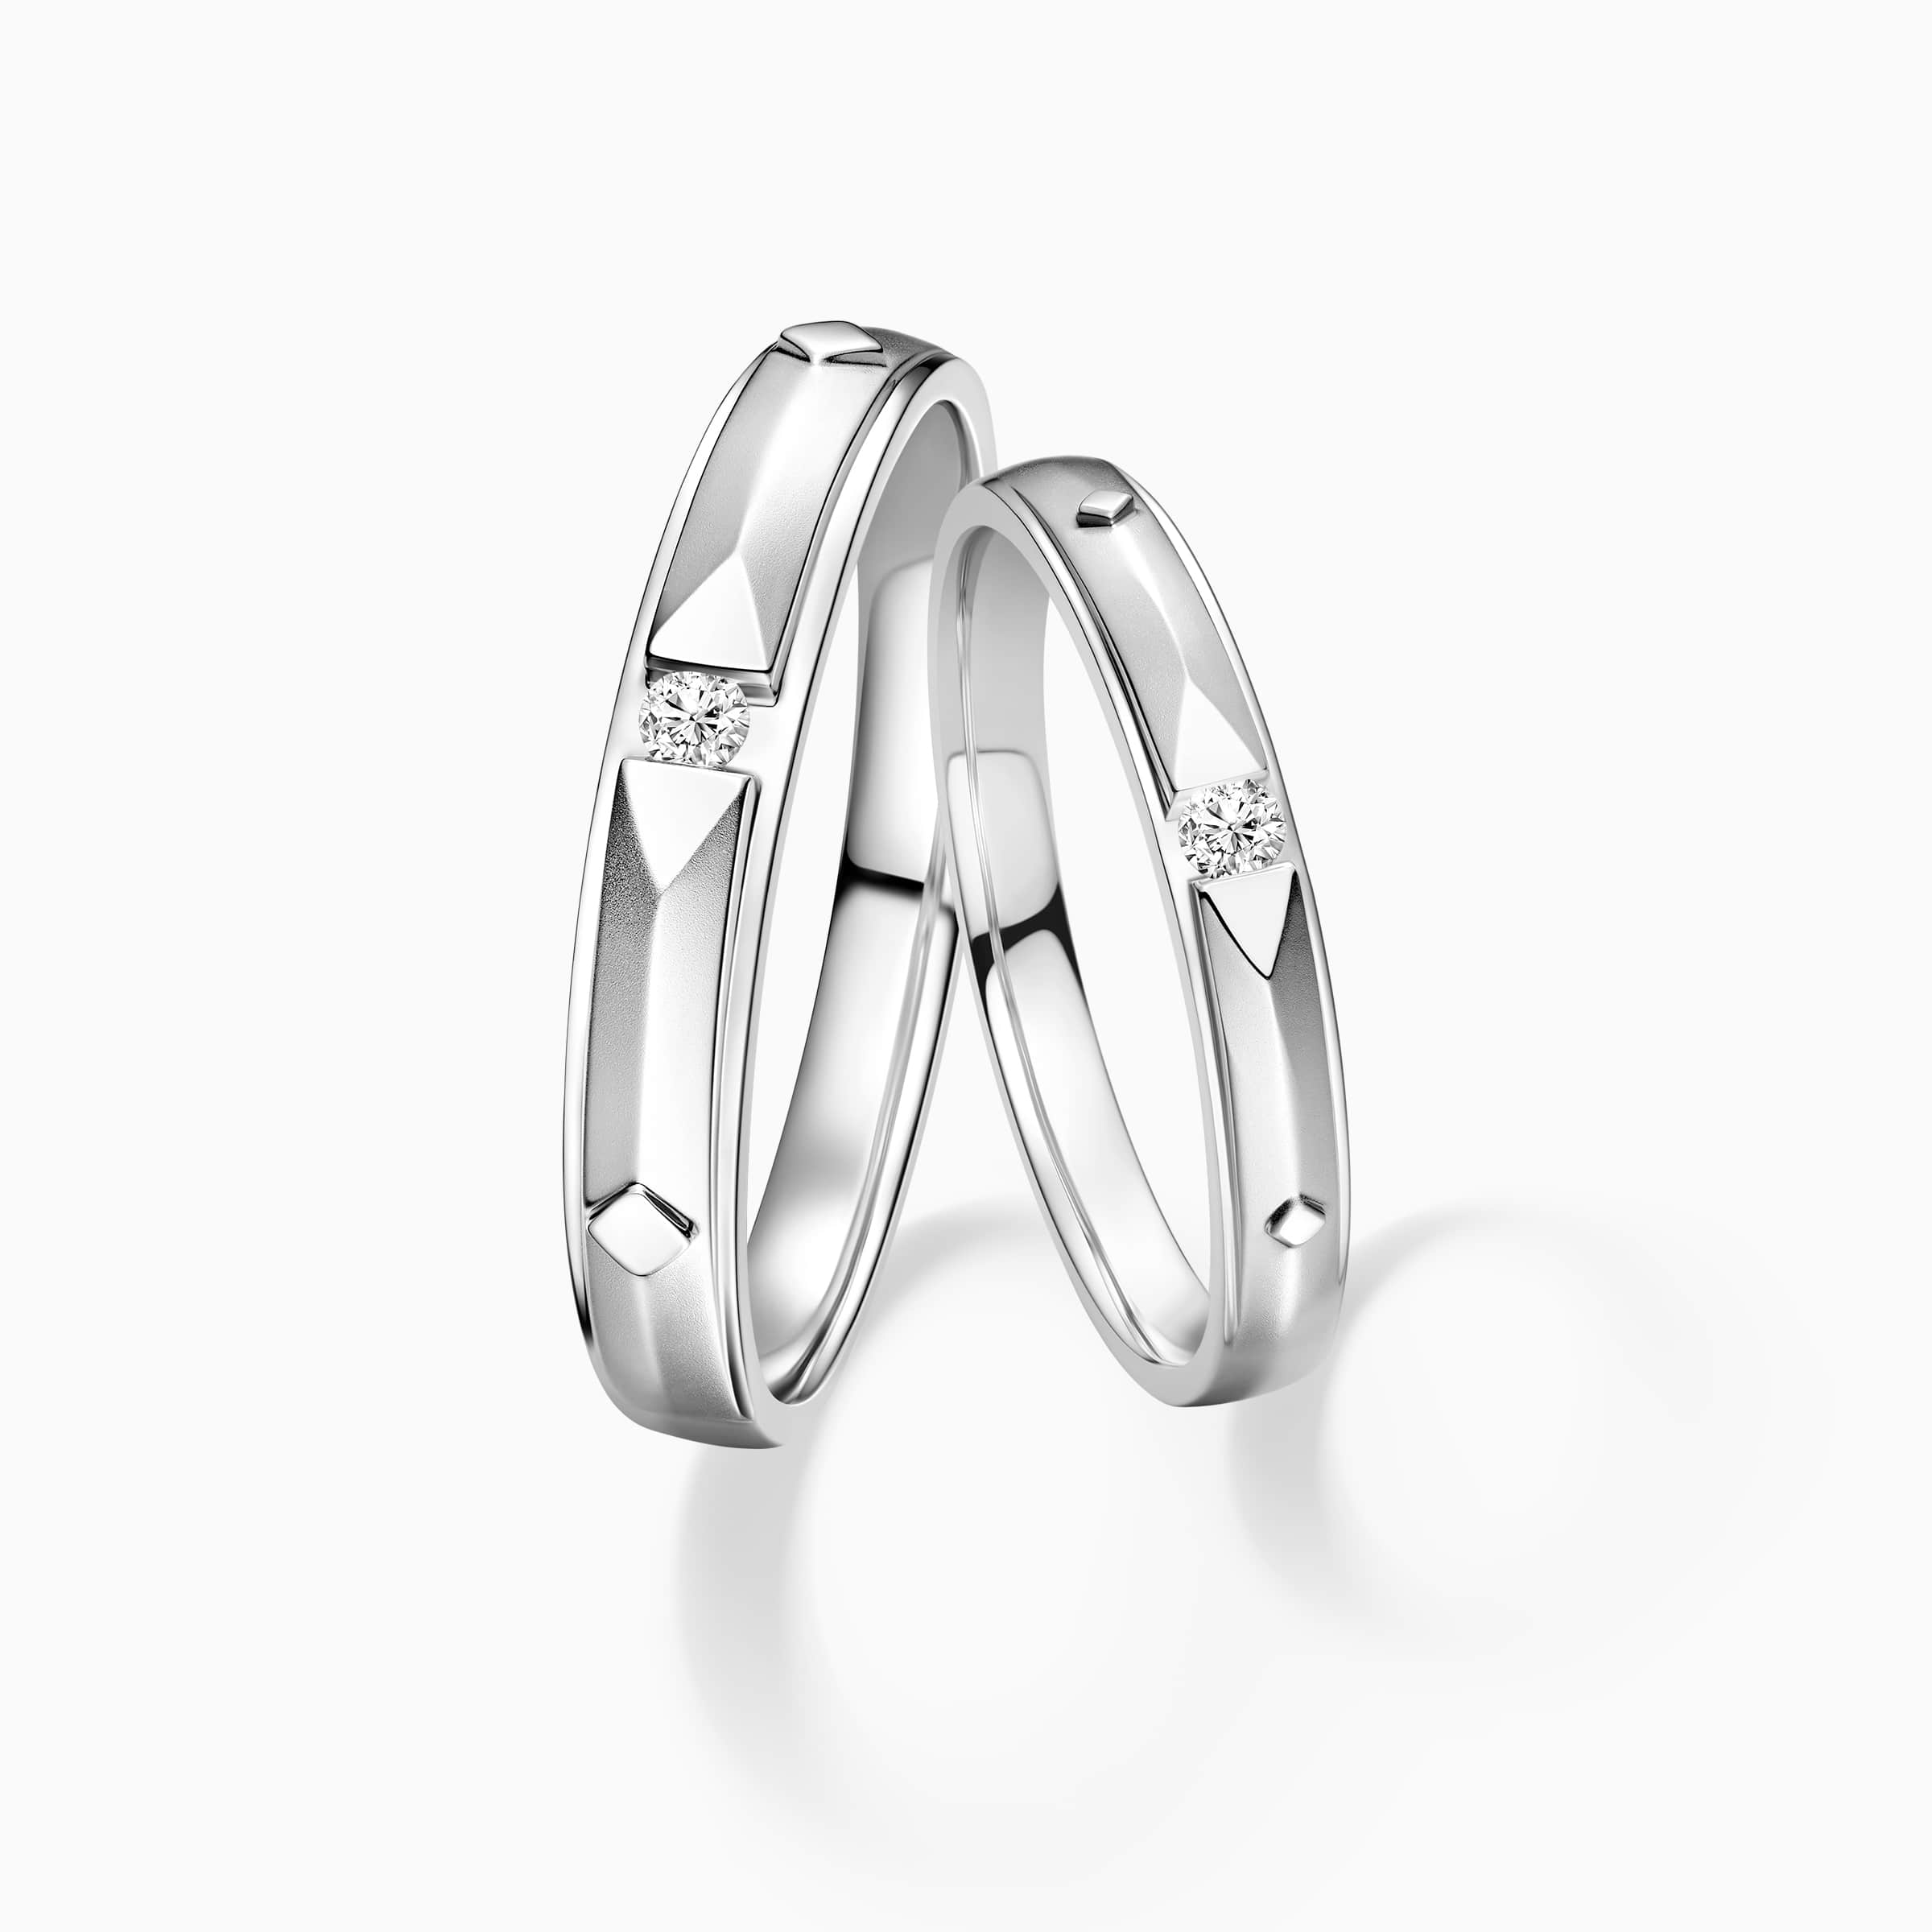 Darry Ring wedding sets his and hers in platinum